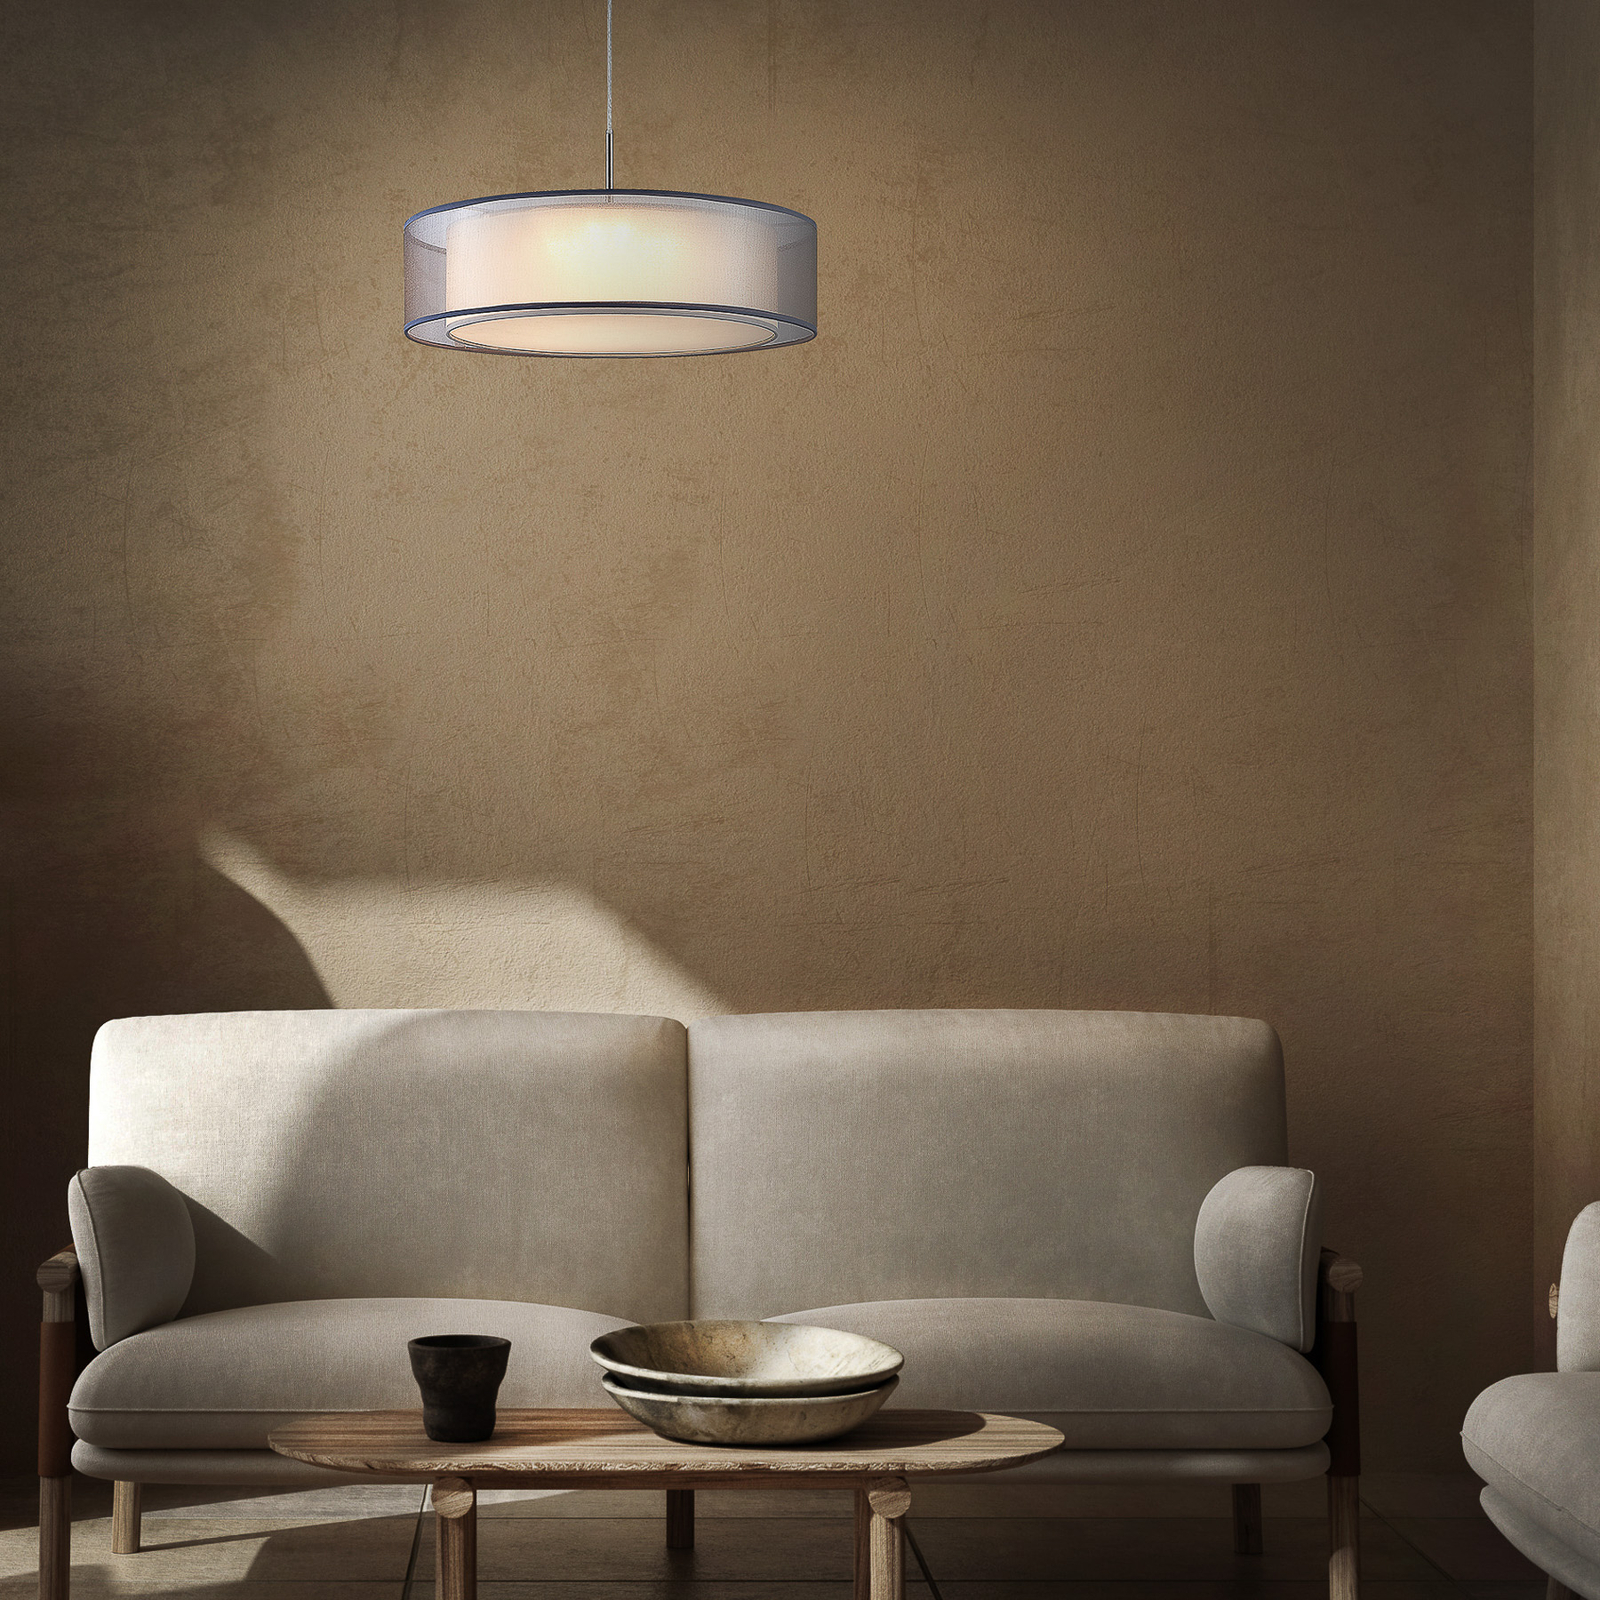 Chloe LED pendant light with a double lampshade